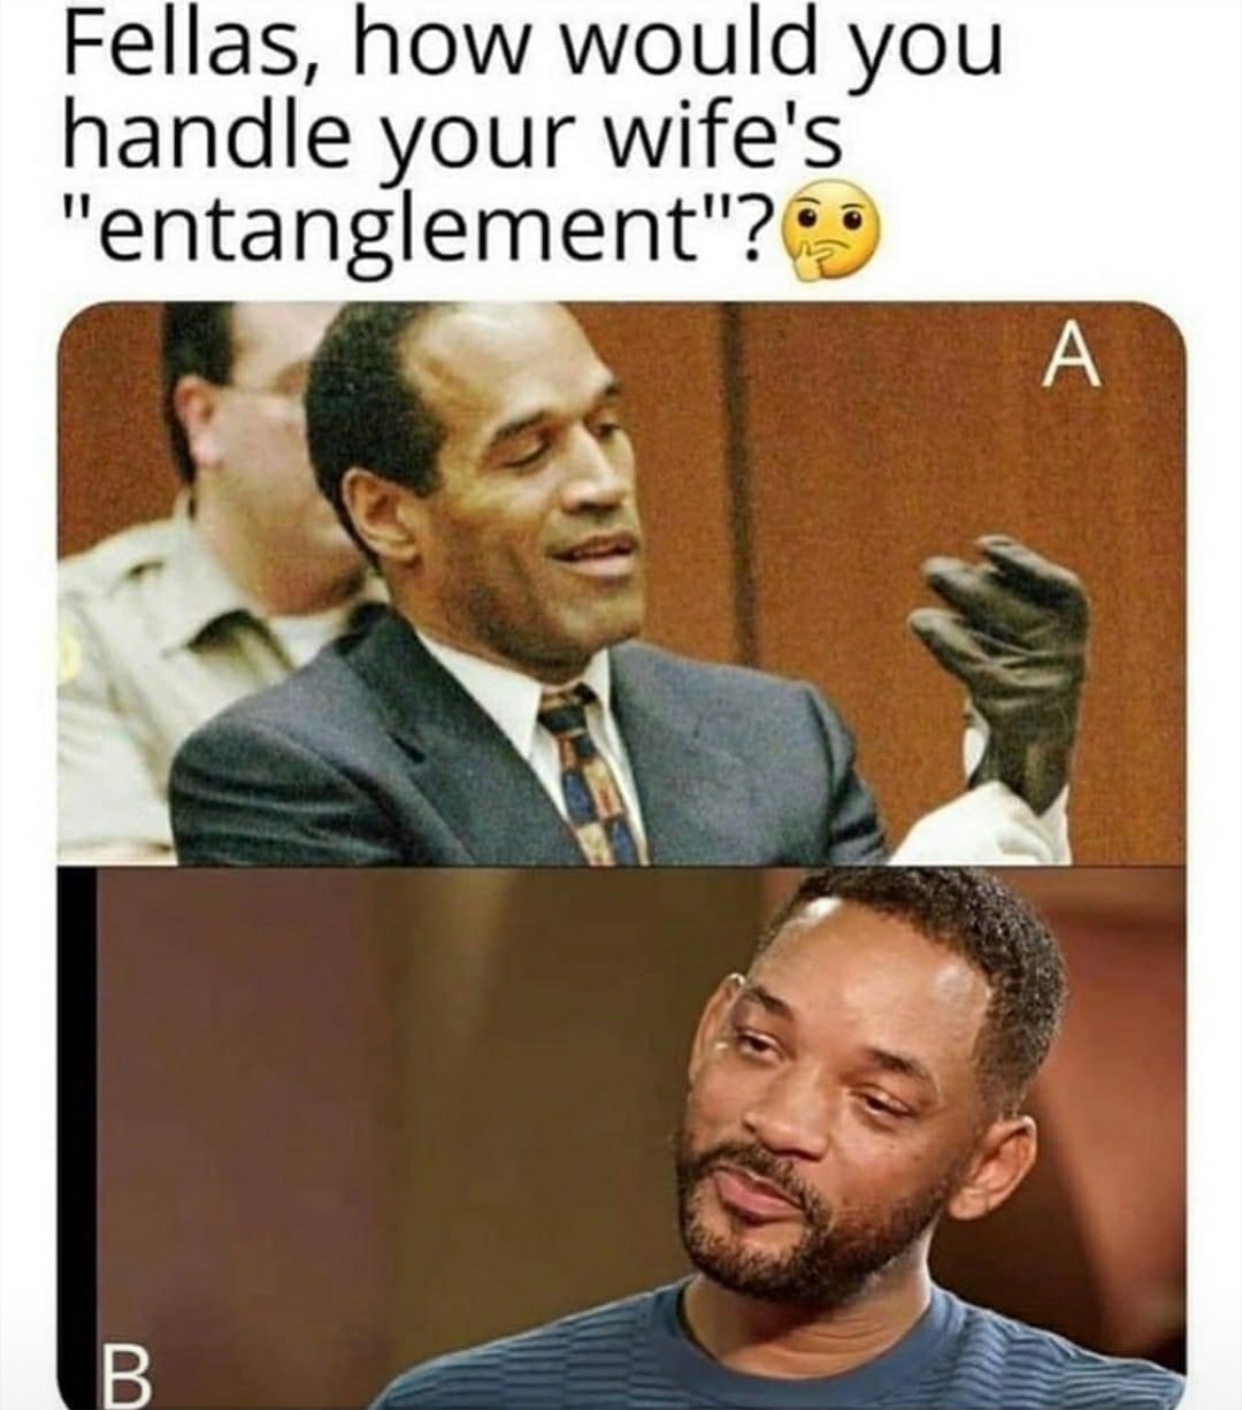 oj simpson trial - Fellas, how would you handle your wife's "entanglement"? A B